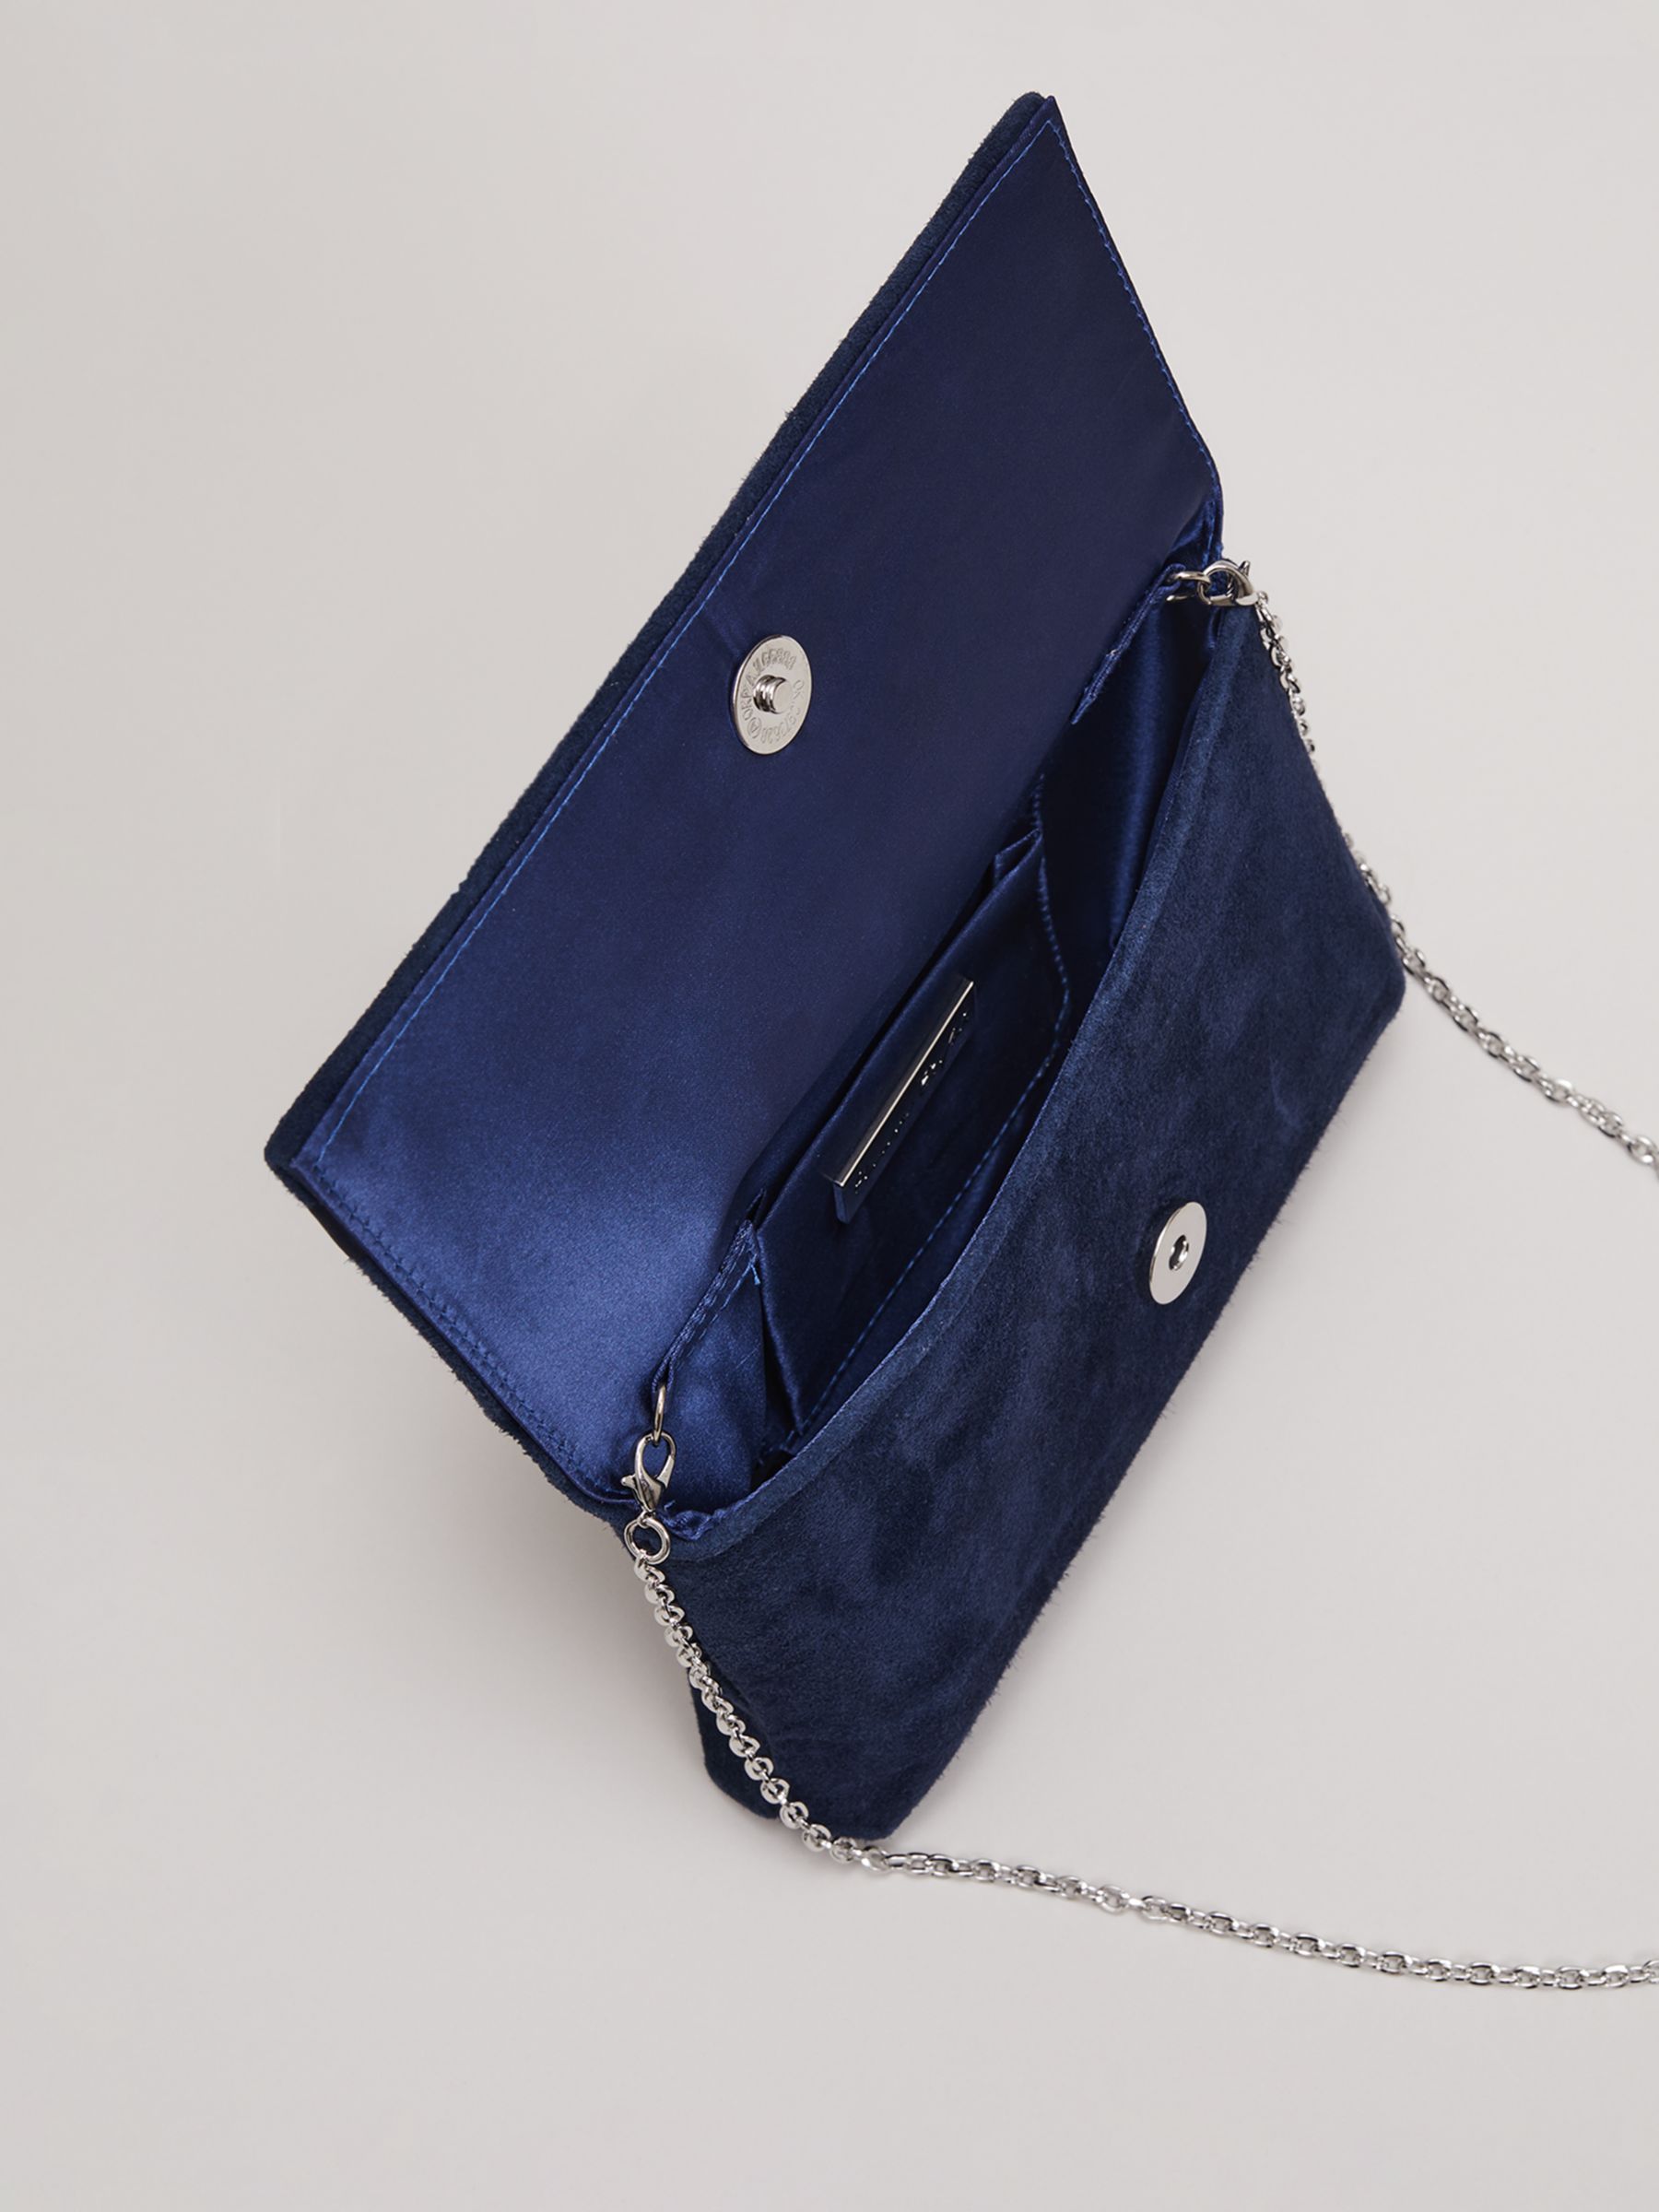 Buy Phase Eight Satin Bow Clutch Bag Online at johnlewis.com